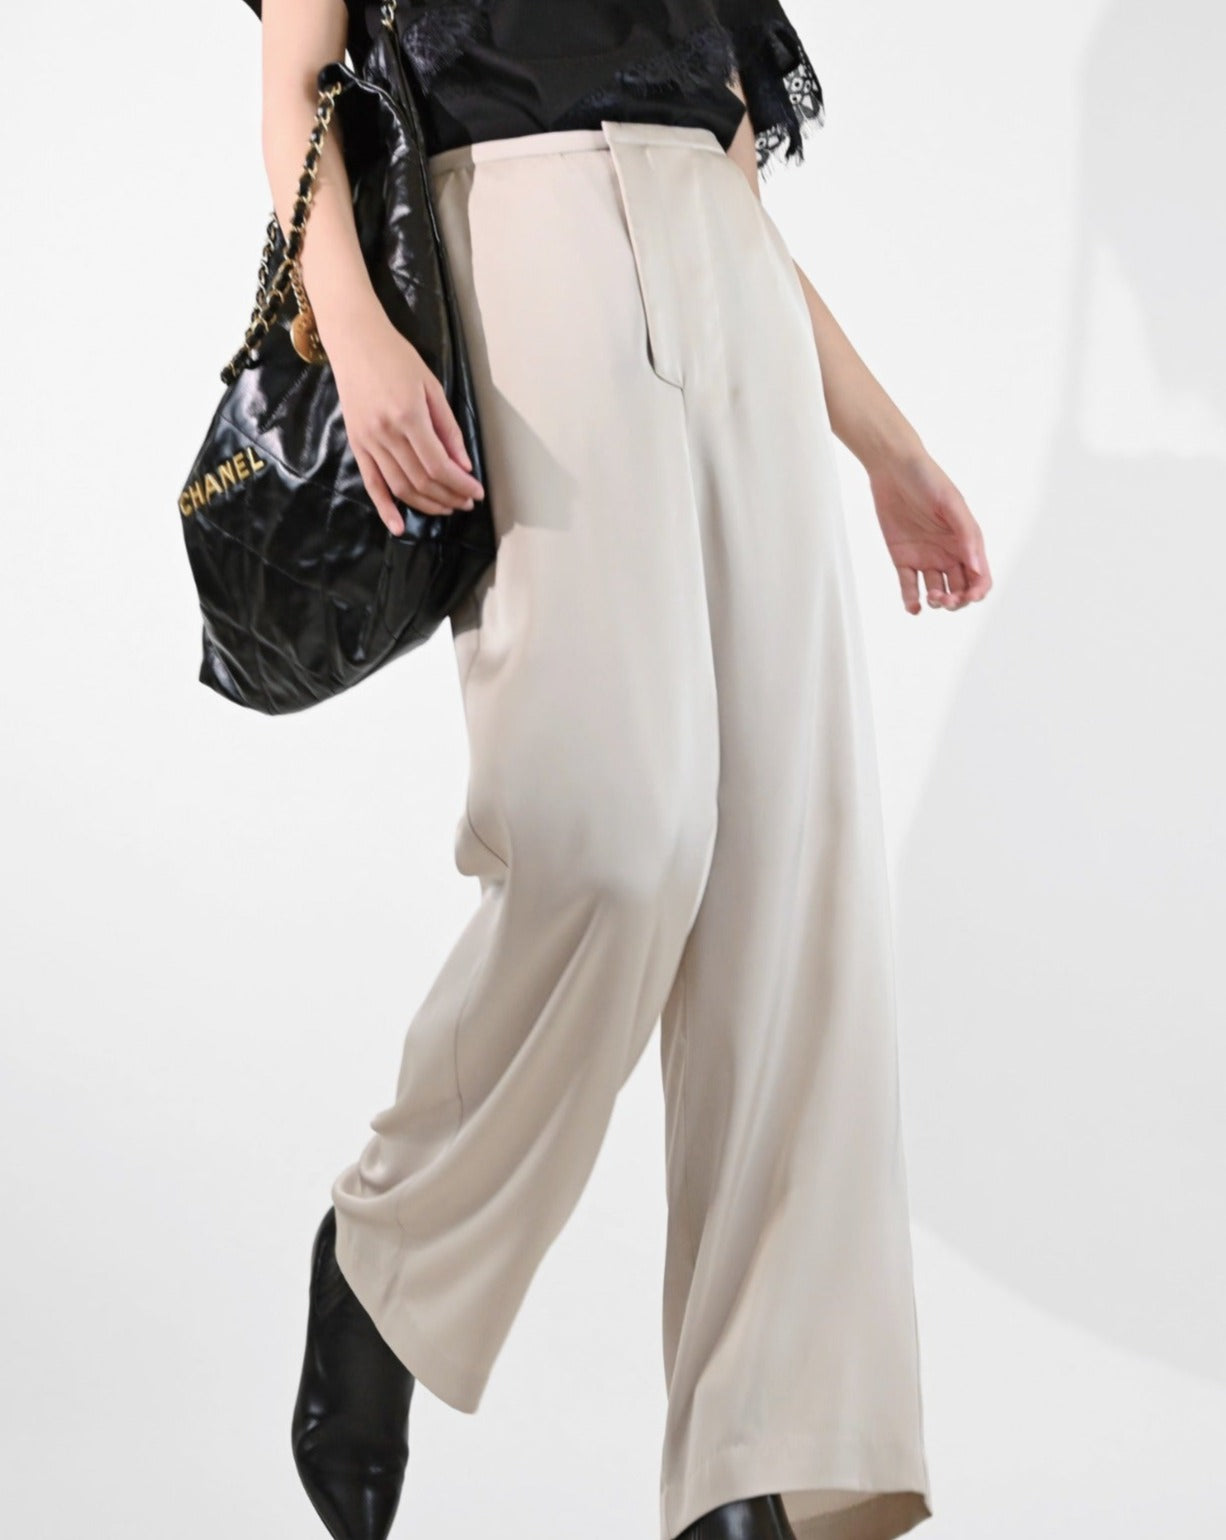 aalis ANGIE silky relaxed pants (Light beige)